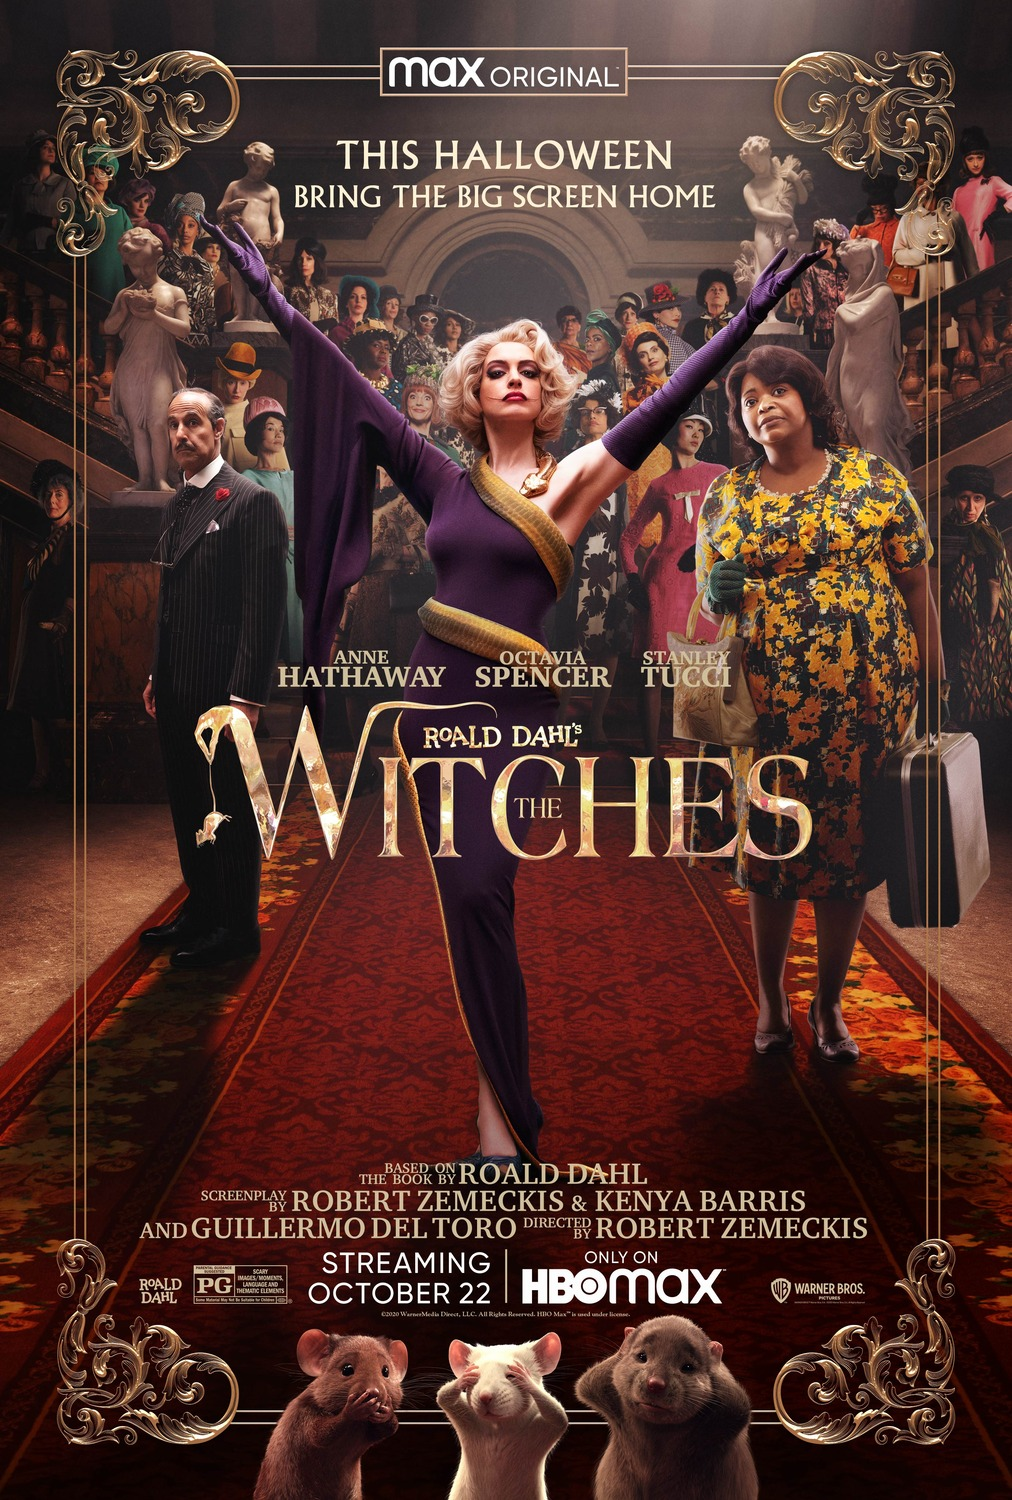 The Witches (2020 film) Warner Bros photo image